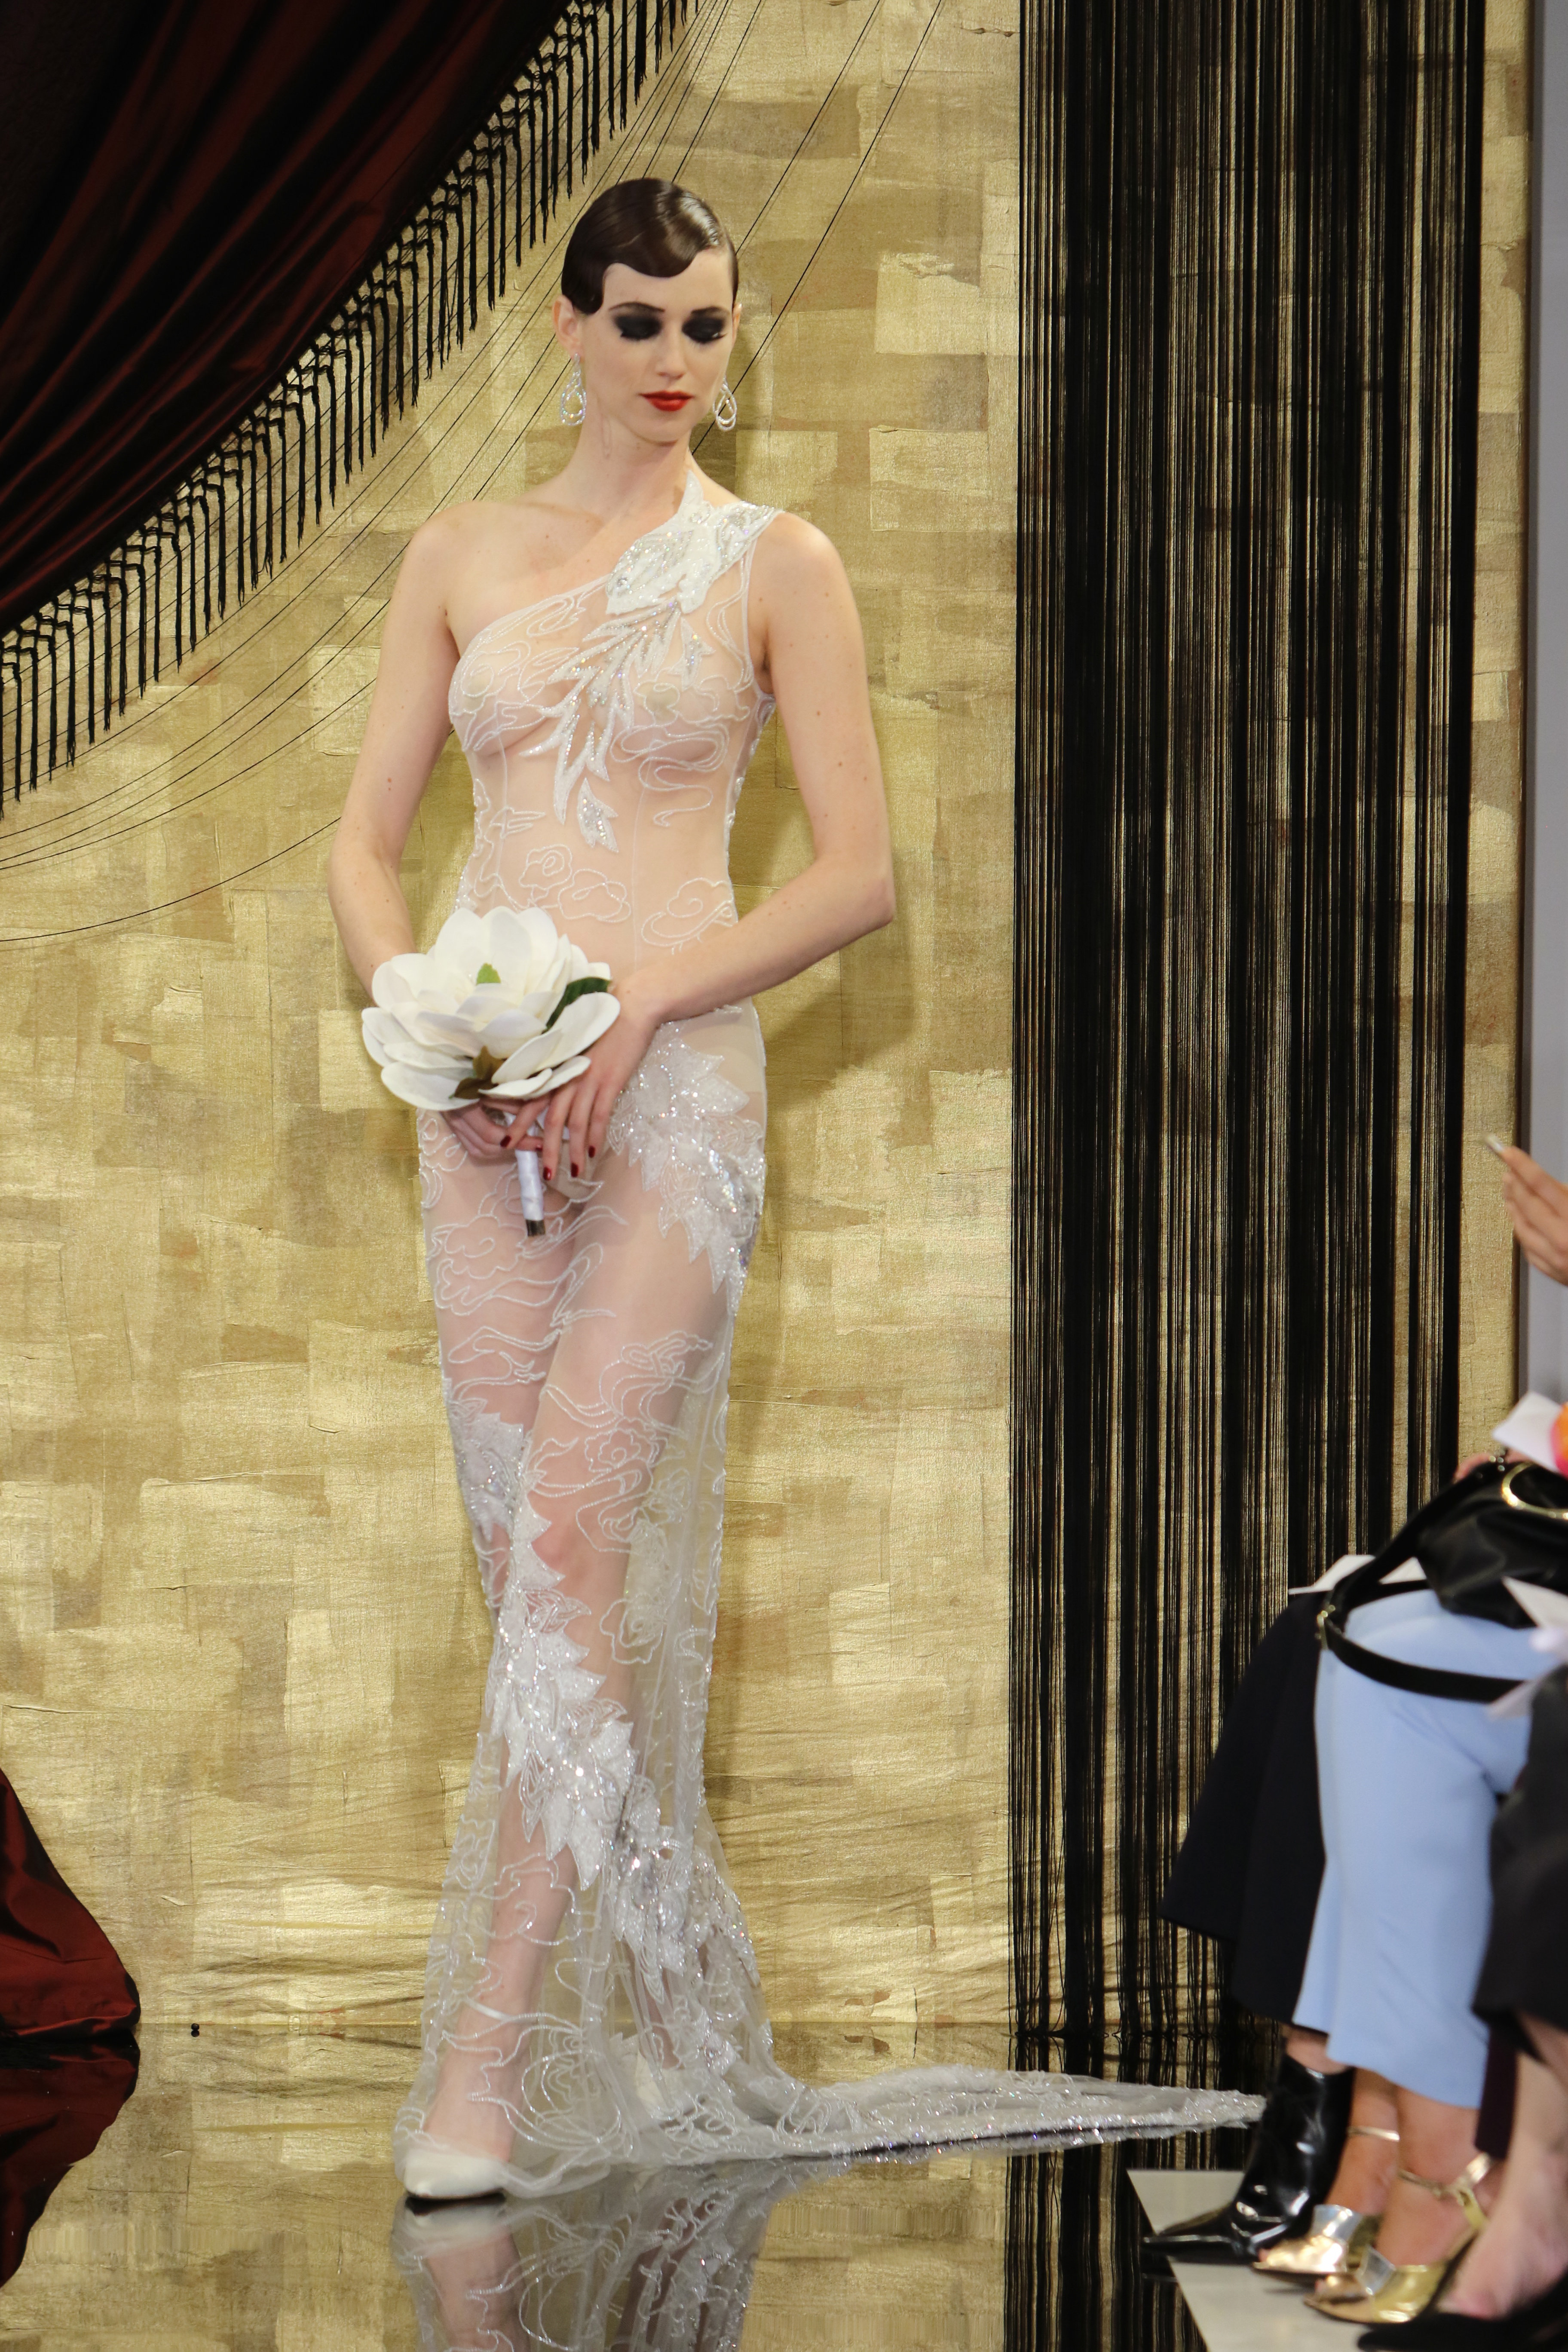 The Best and Worst Wedding Dresses That Have Been Worn in Movies